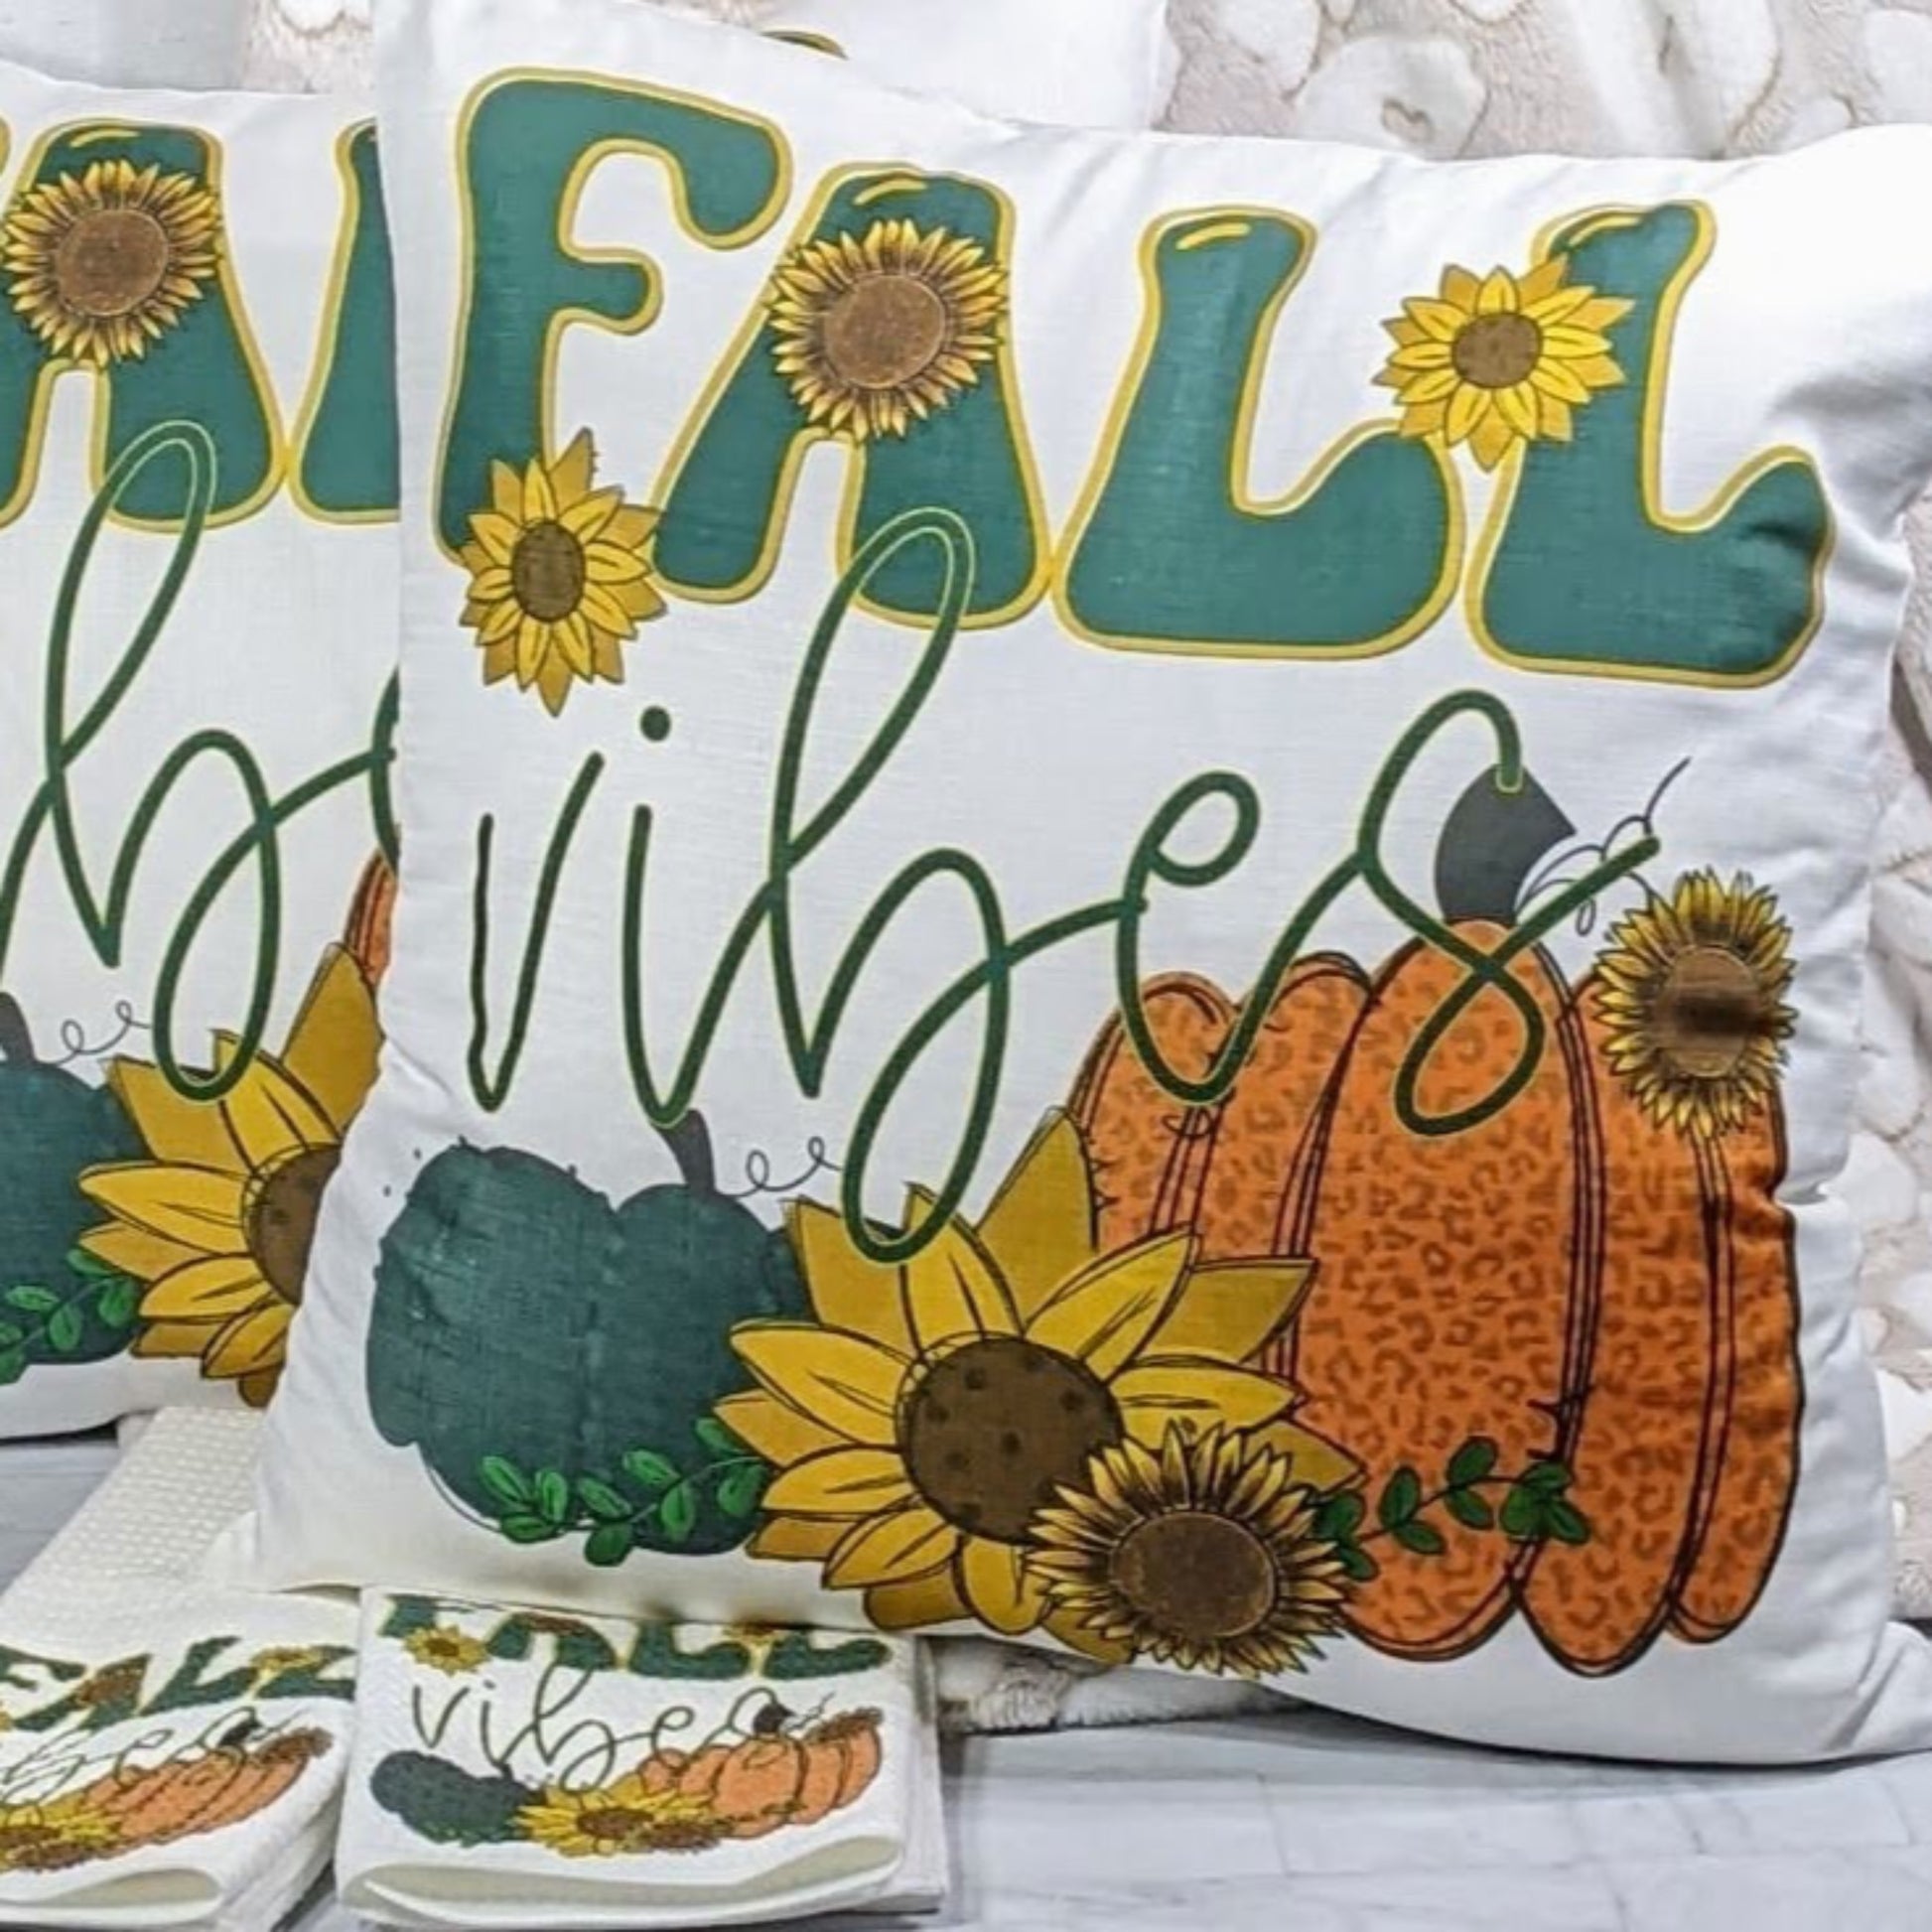 Fall Vibes Throw Pillow and Towel Gift Set